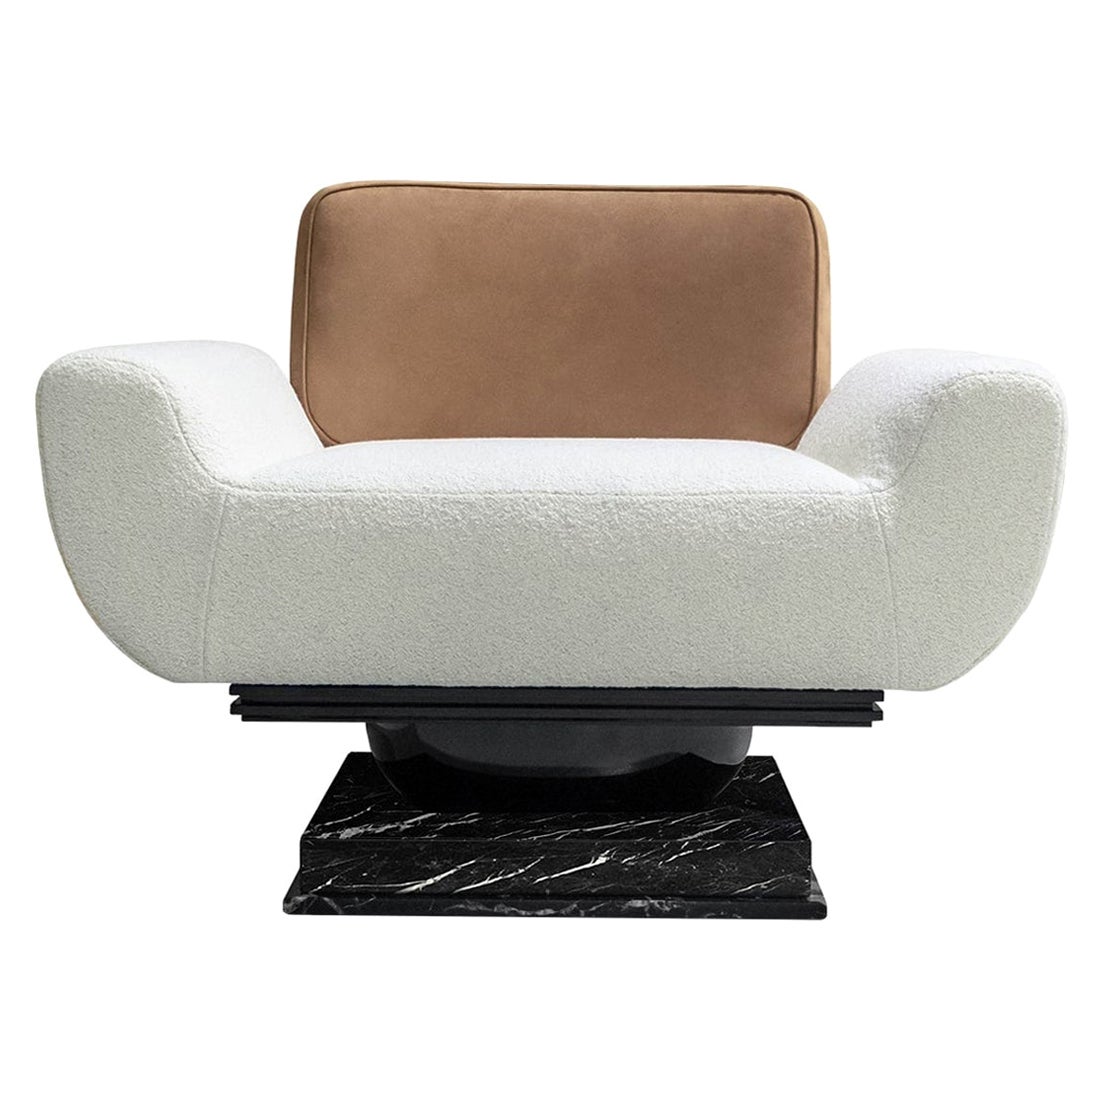 Mid-Century Modern Armchair Bouclé, Leather Upholstered & Nero Marquina Marble